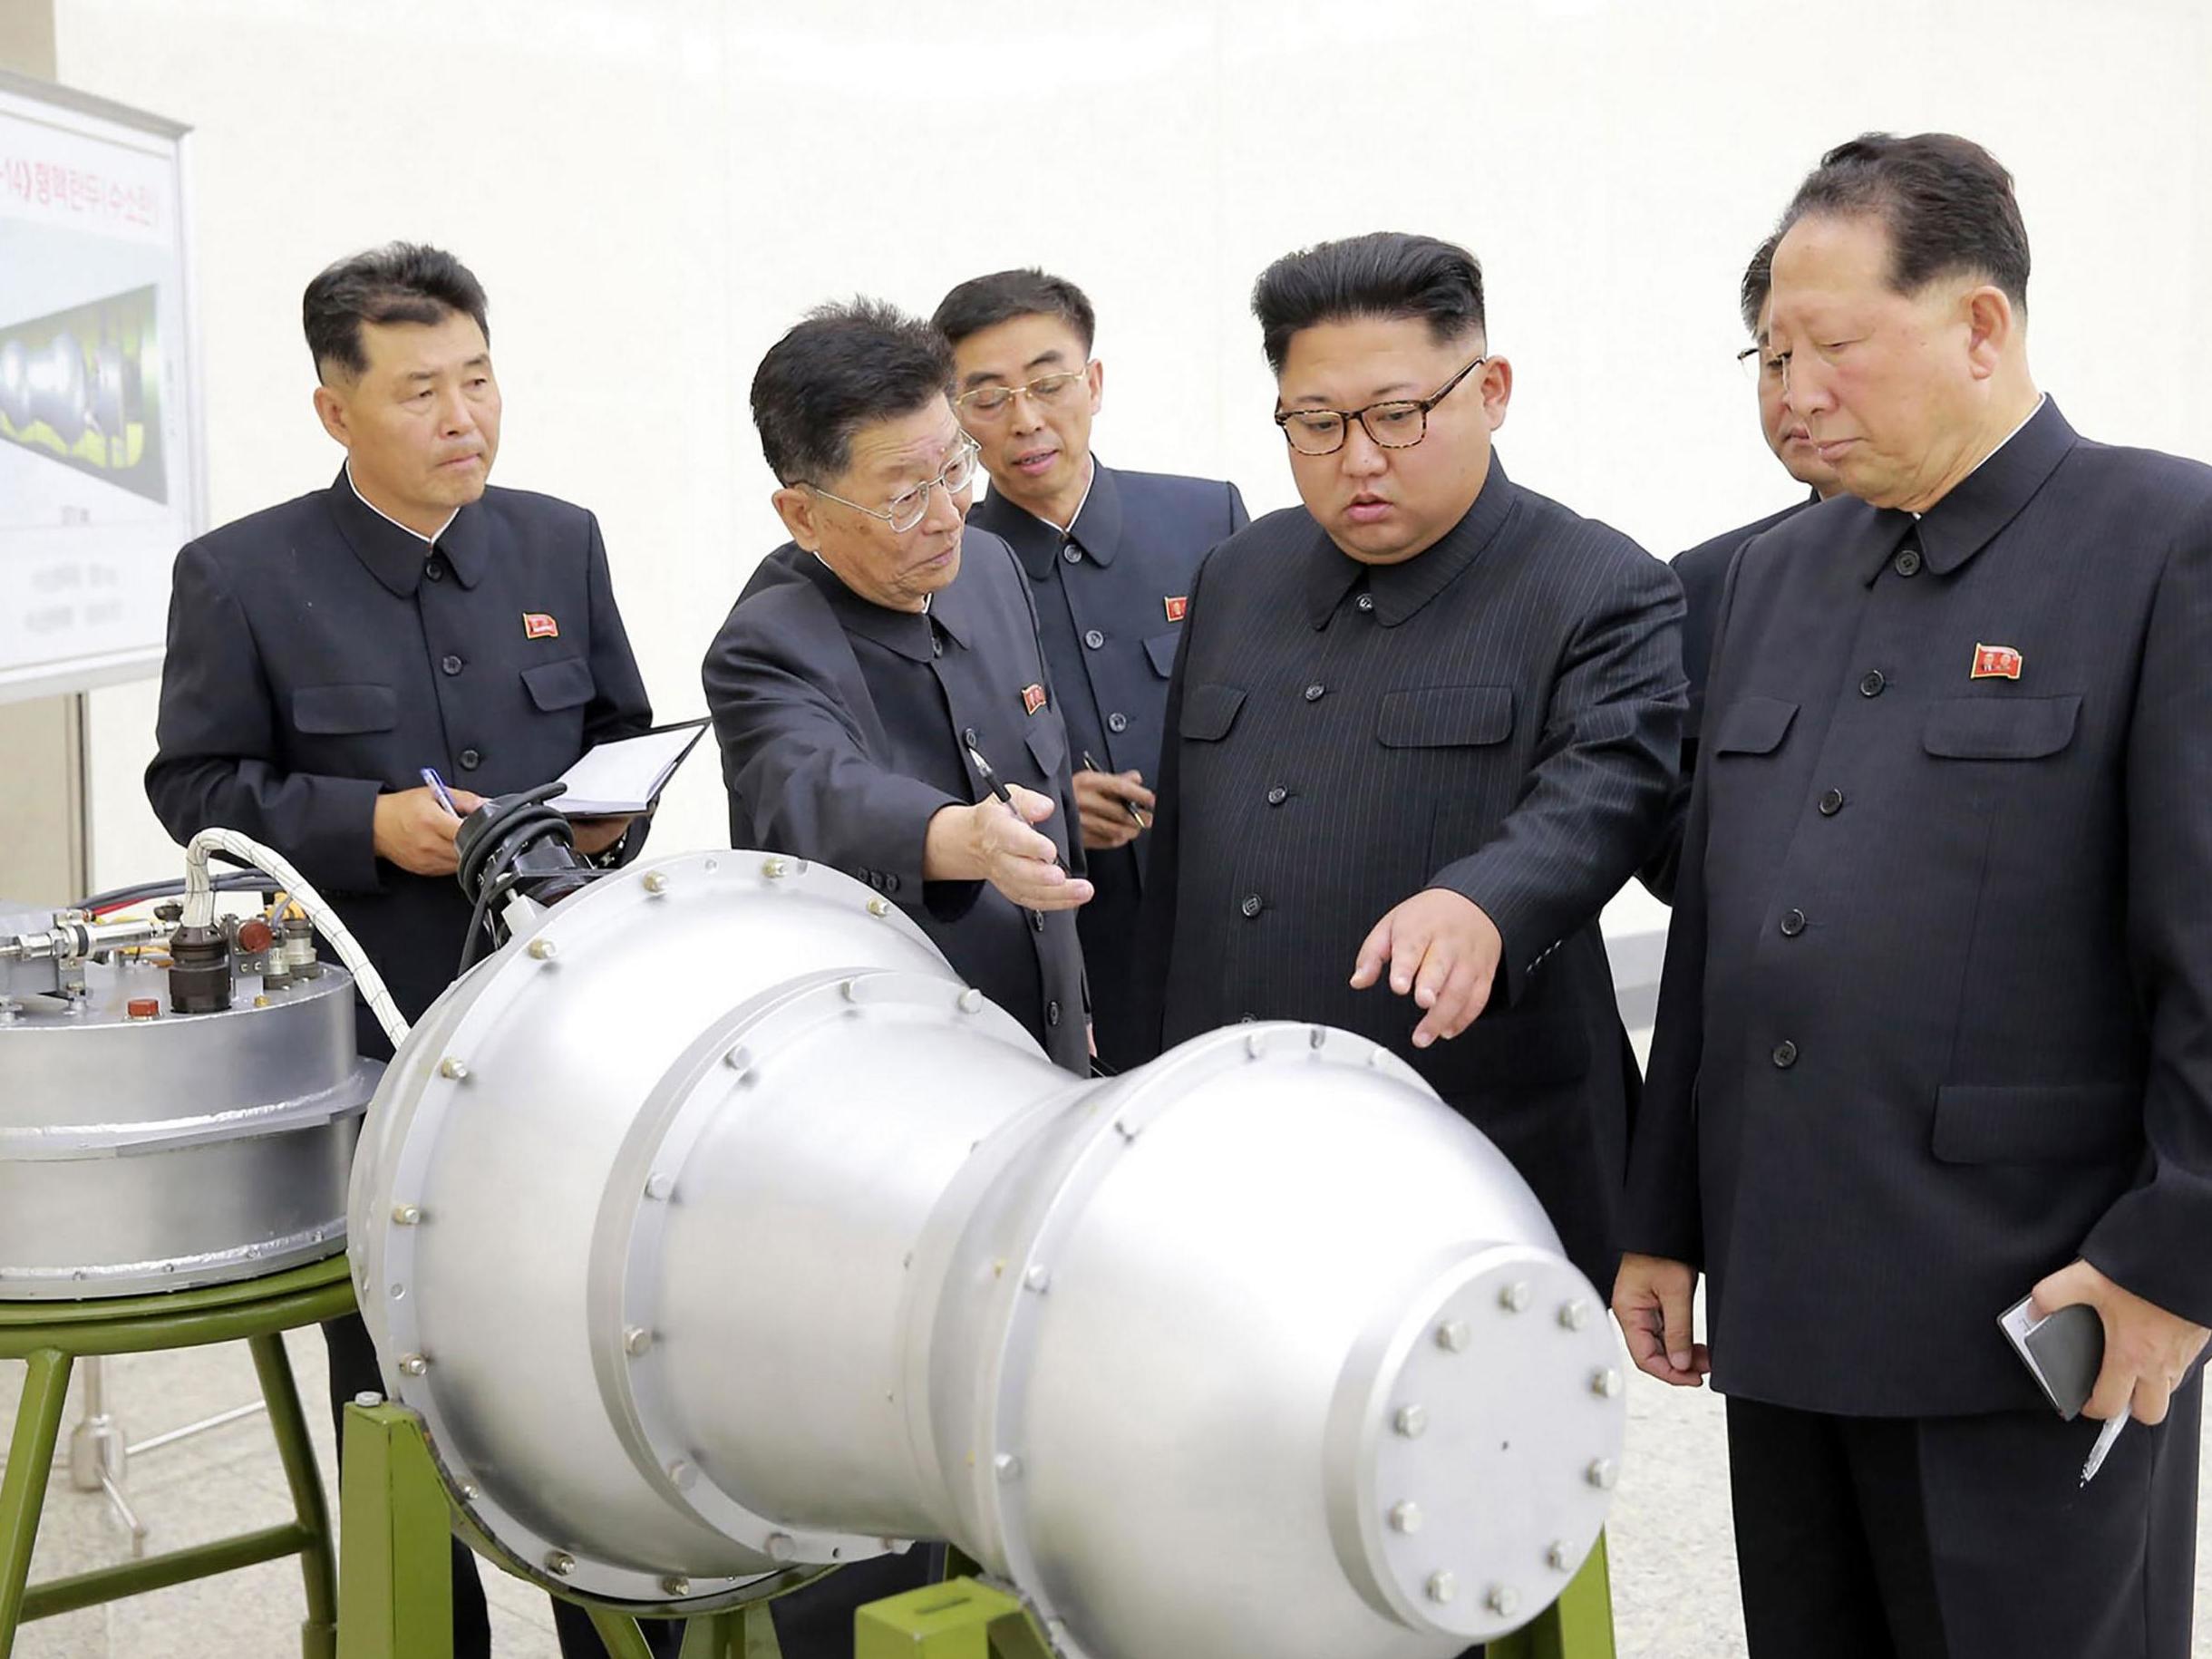 Kim Jong-Un inspects what is purported to be a nuclear device in September 2017